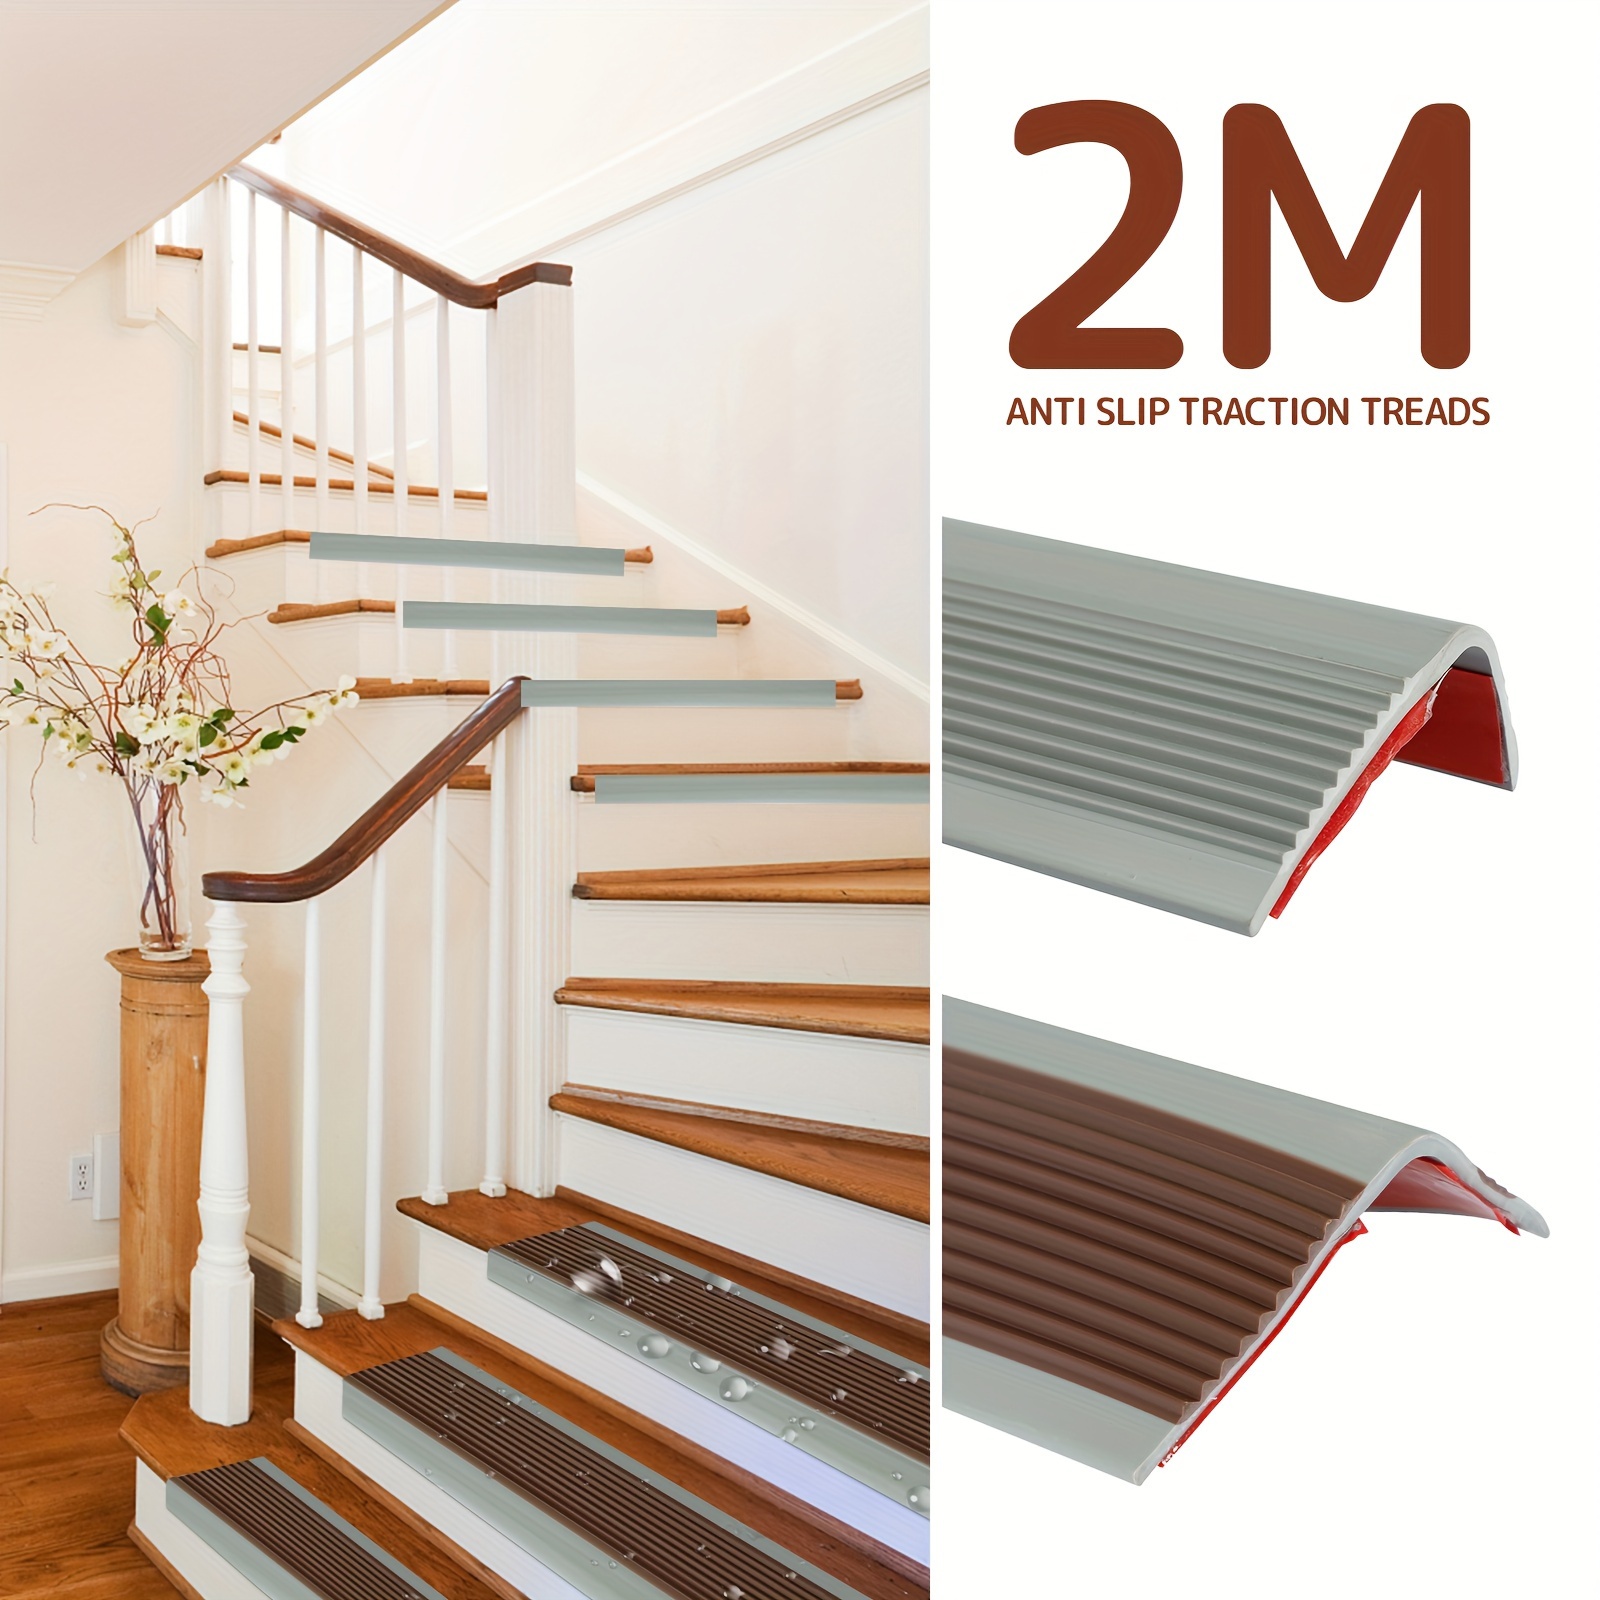 Stair Edge Protector Stair Edging Self-Adhesive Rubber Stair Nosing Stair Nose Molding, Non-Slip Stair Tread Stair Trim for Indoor & Outdoor Stair